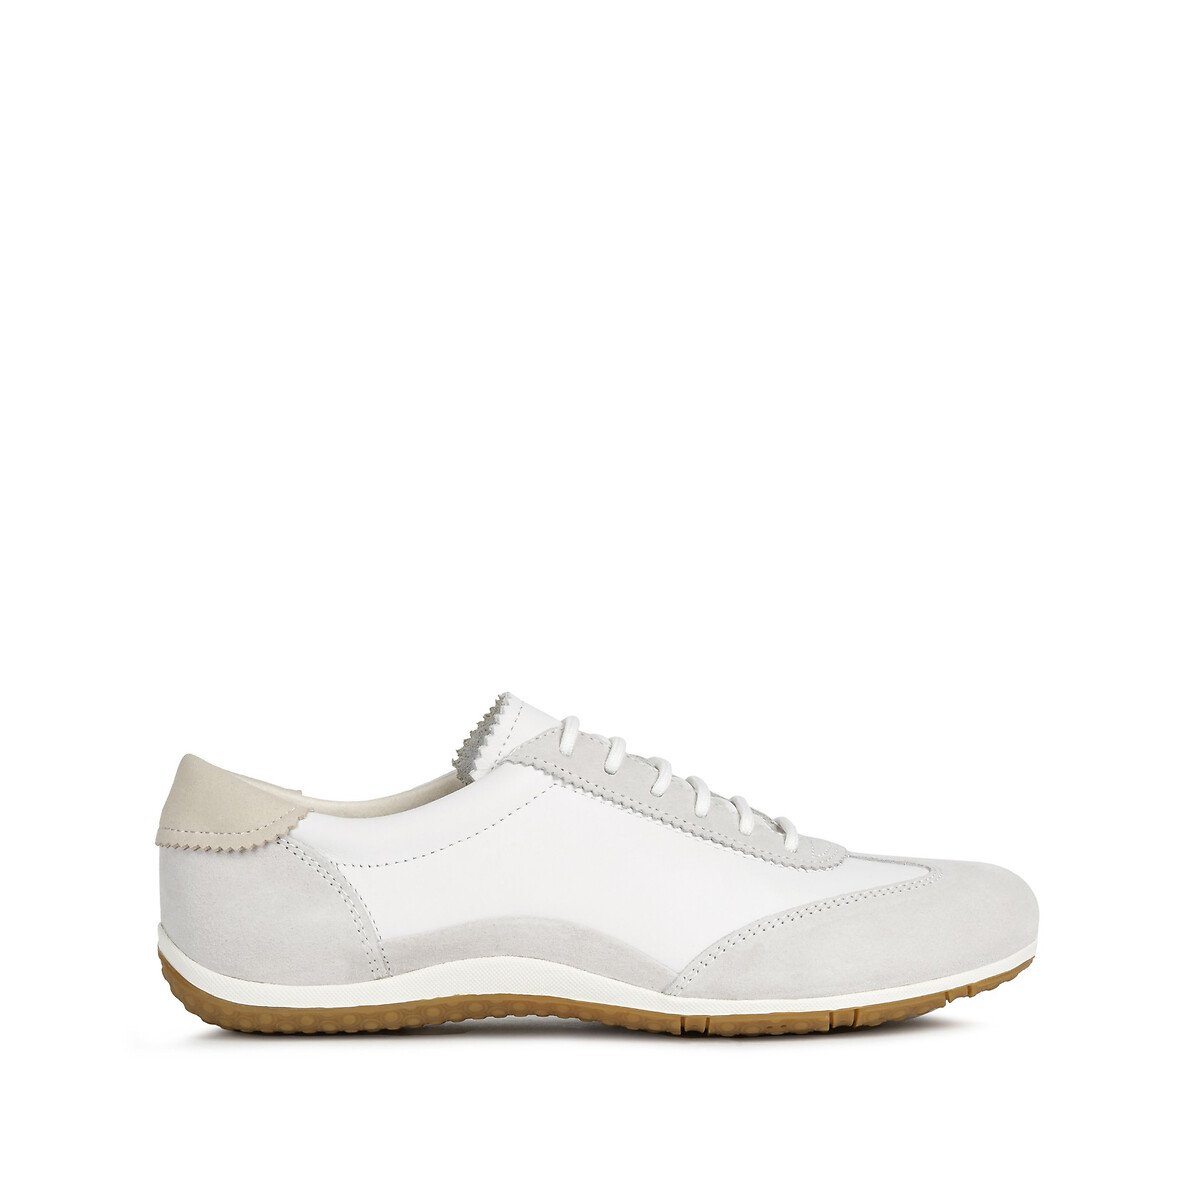 Vega Suede Breathable Trainers